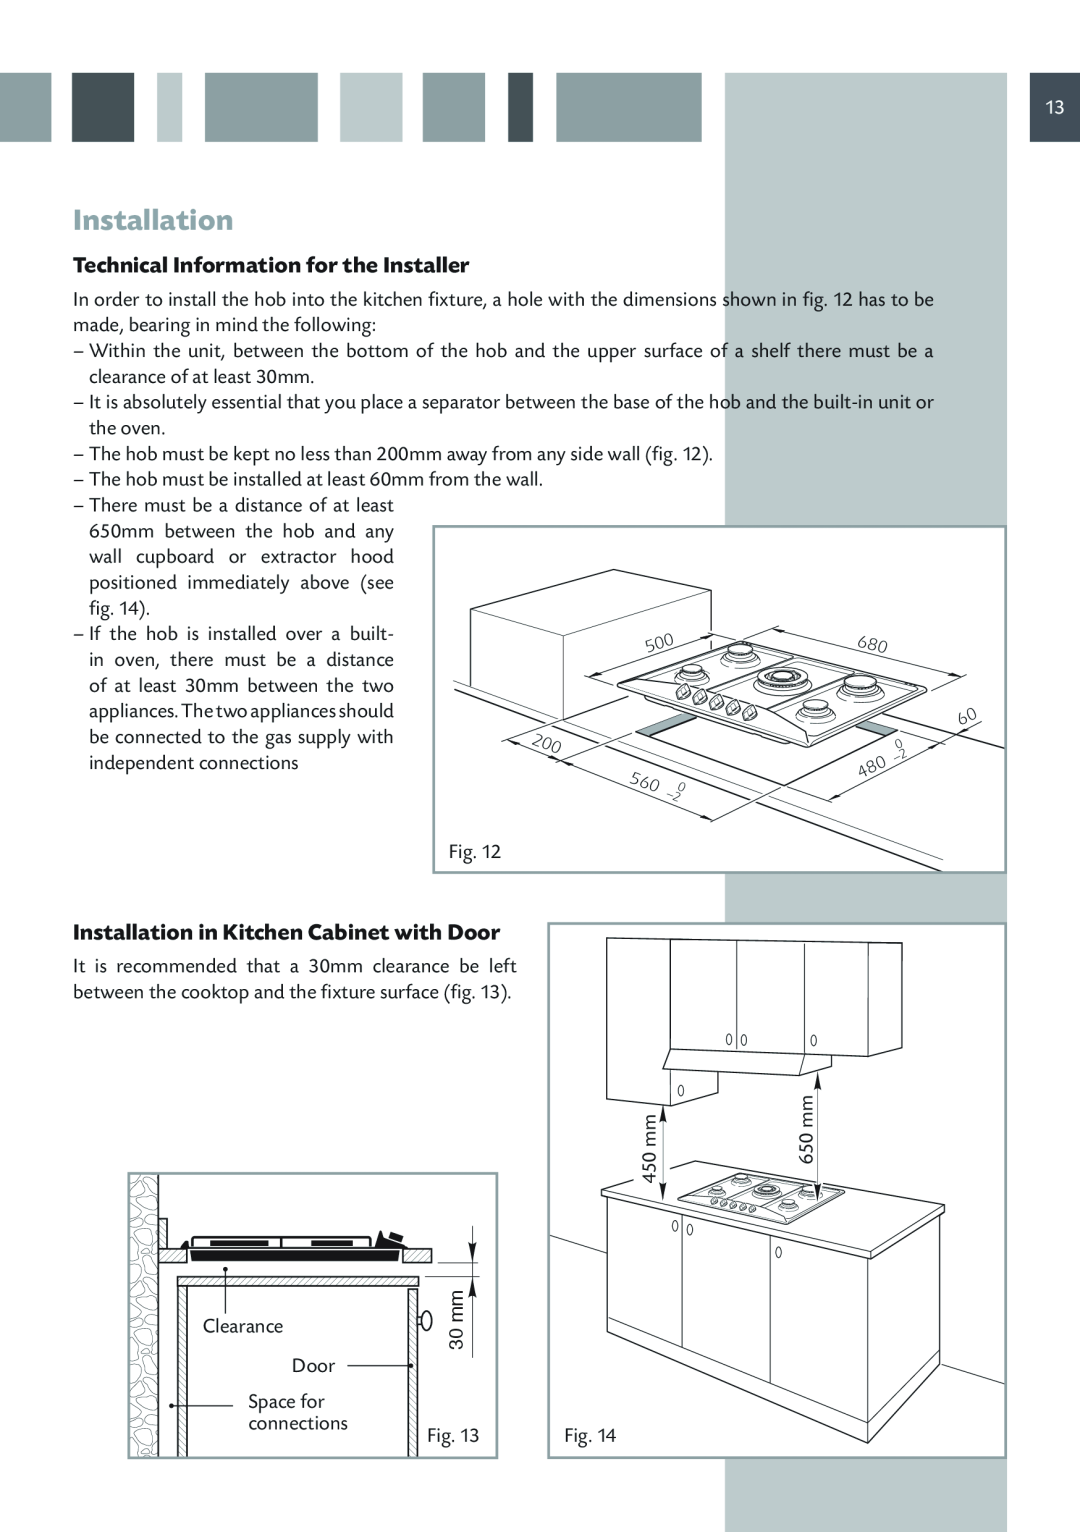 CDA HCG 741, HCG 731 manual Technical Information for the Installer, Installation in Kitchen Cabinet with Door 